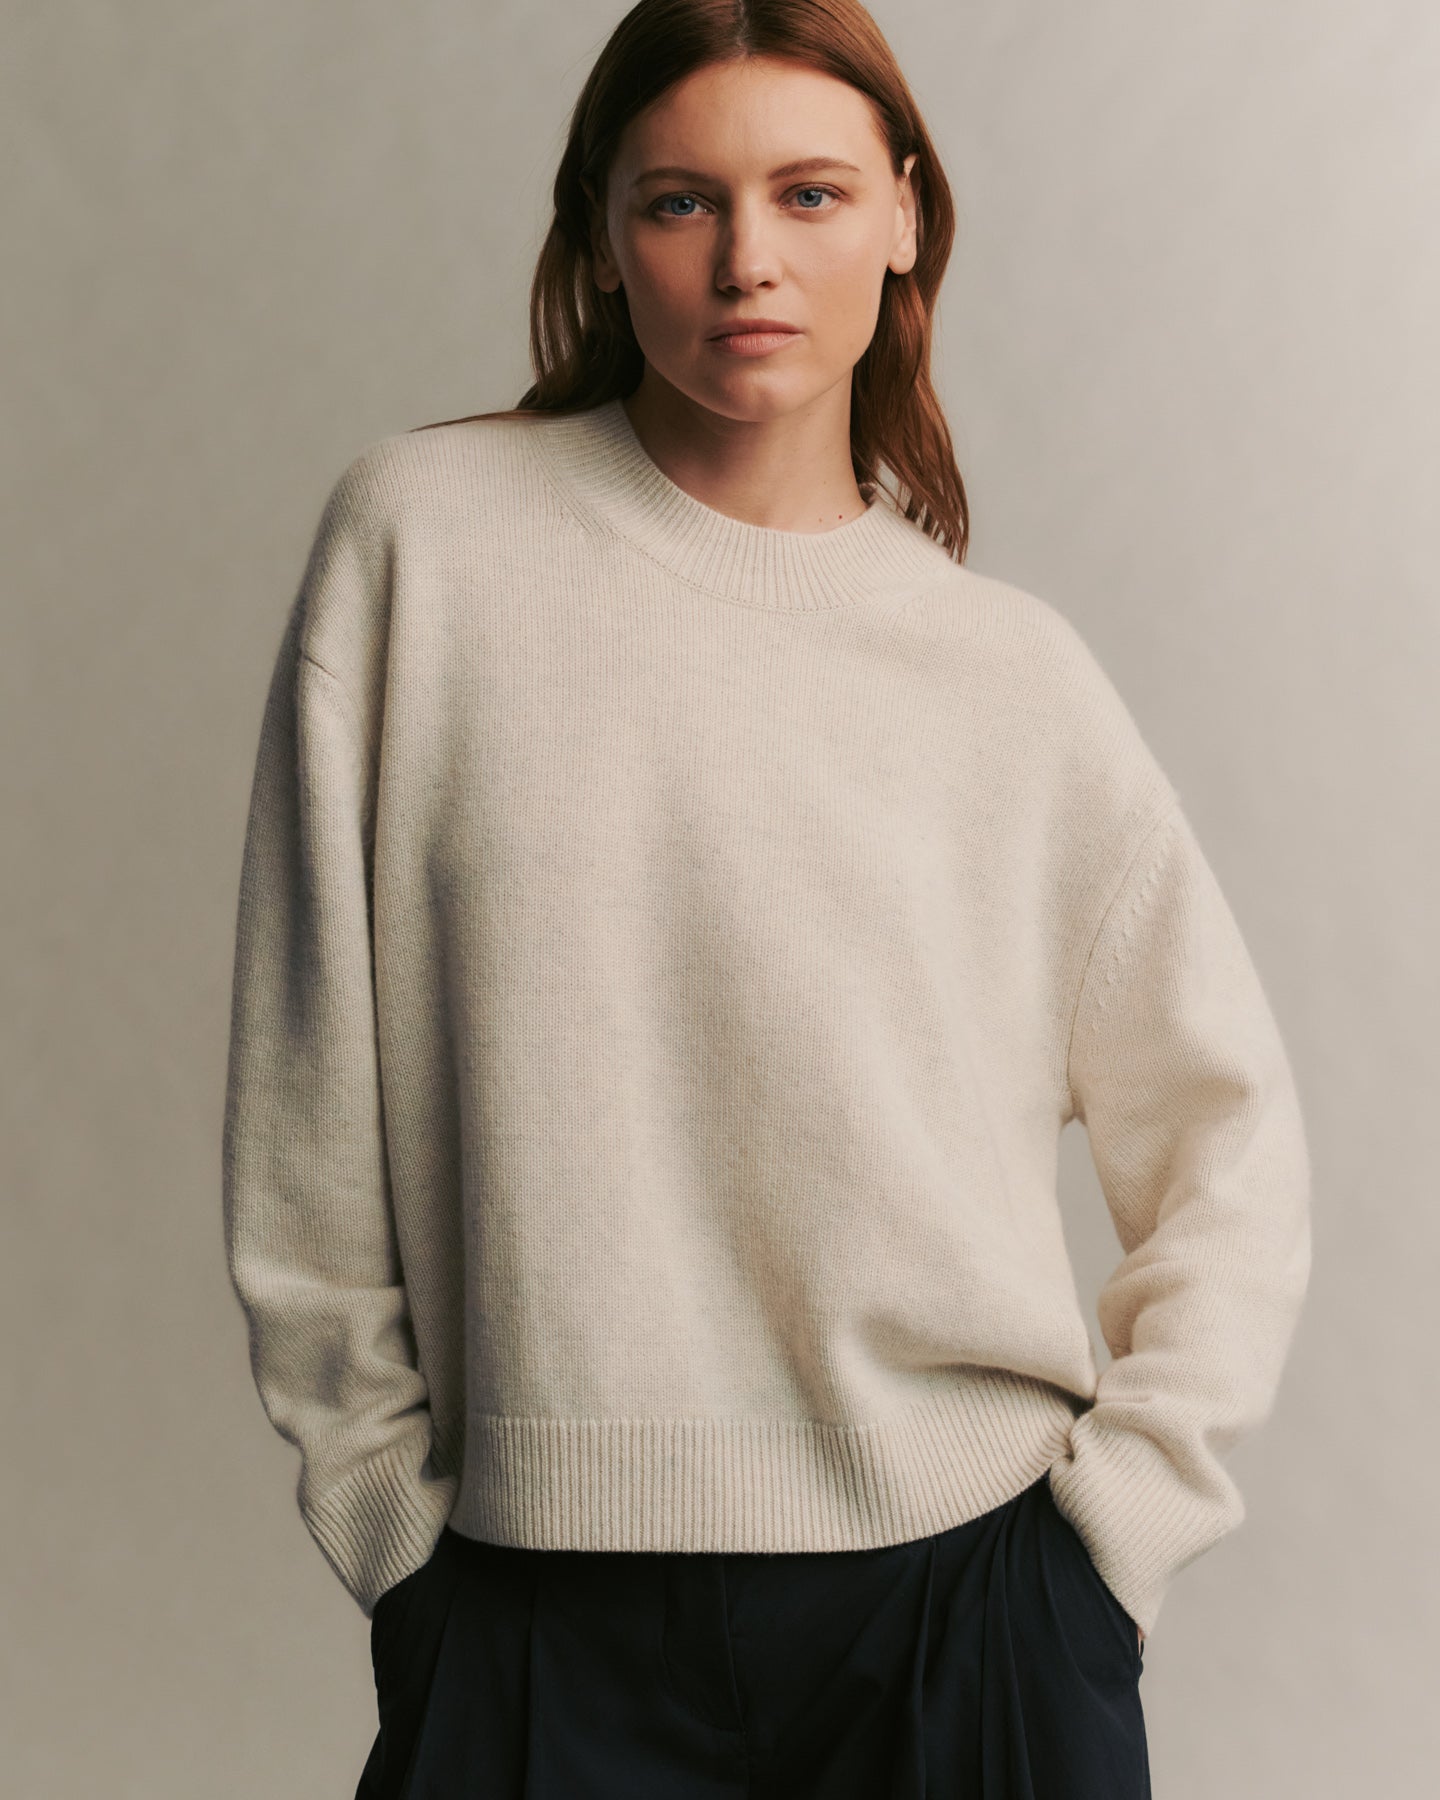 TWP White heather grey Boy Crew in Cashmere view 2